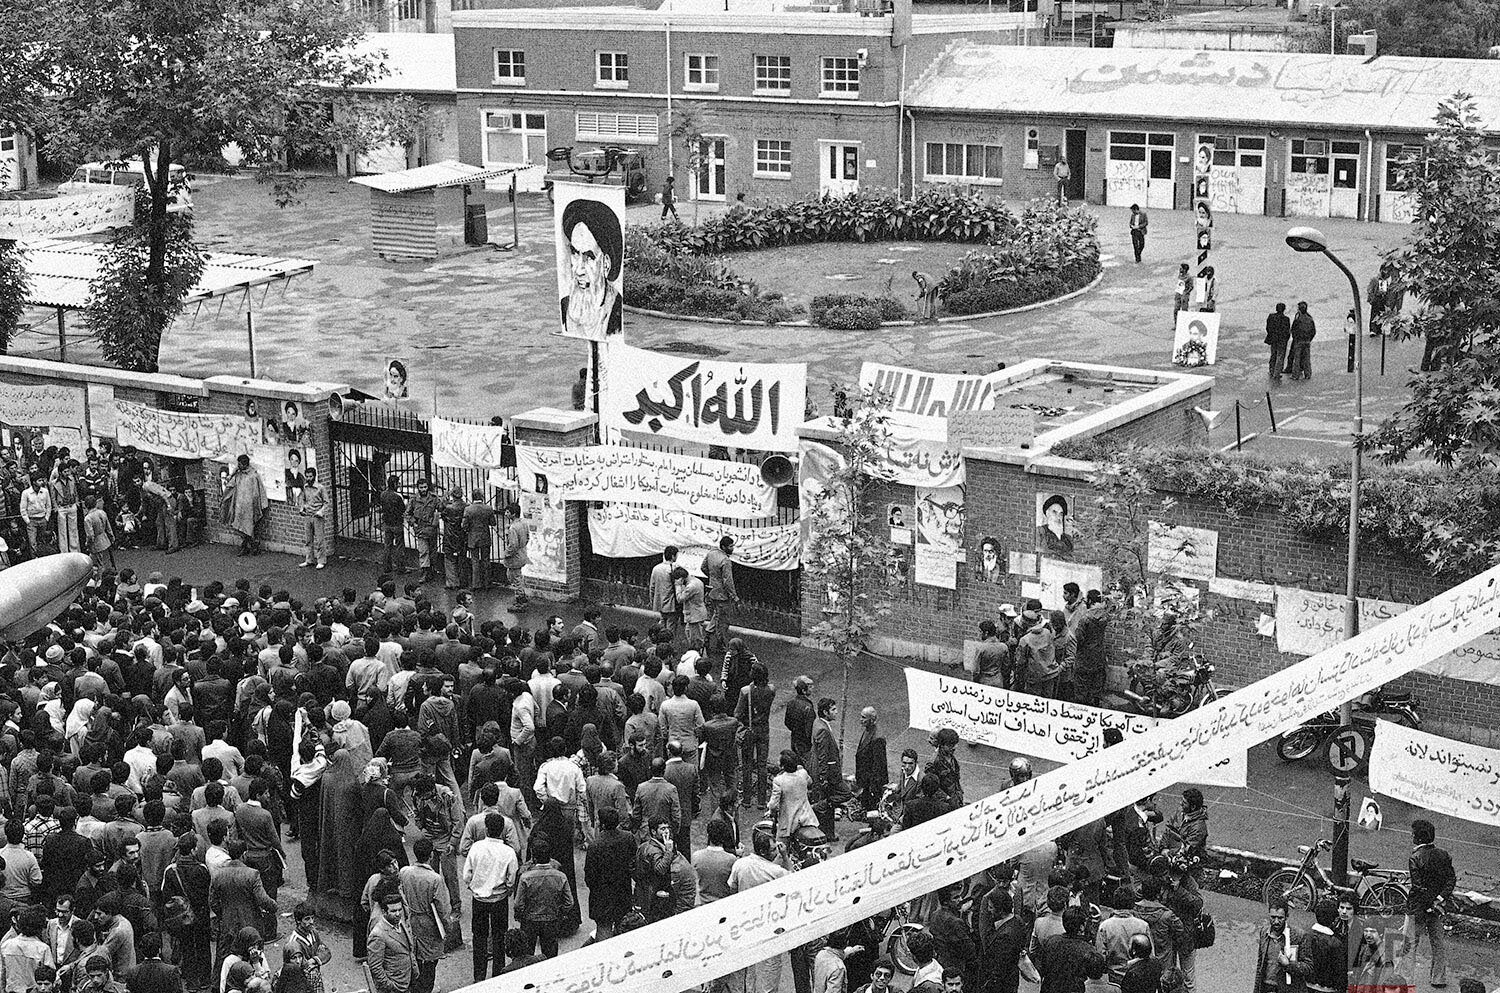  Iranian people gather before the entrance of the United States Embassy compound in Tehran, Iran  Nov. 6, 1979, on the third day of the occupation of the building. Iranian students took over the Embassy on Sunday and are still holding the staff hosta